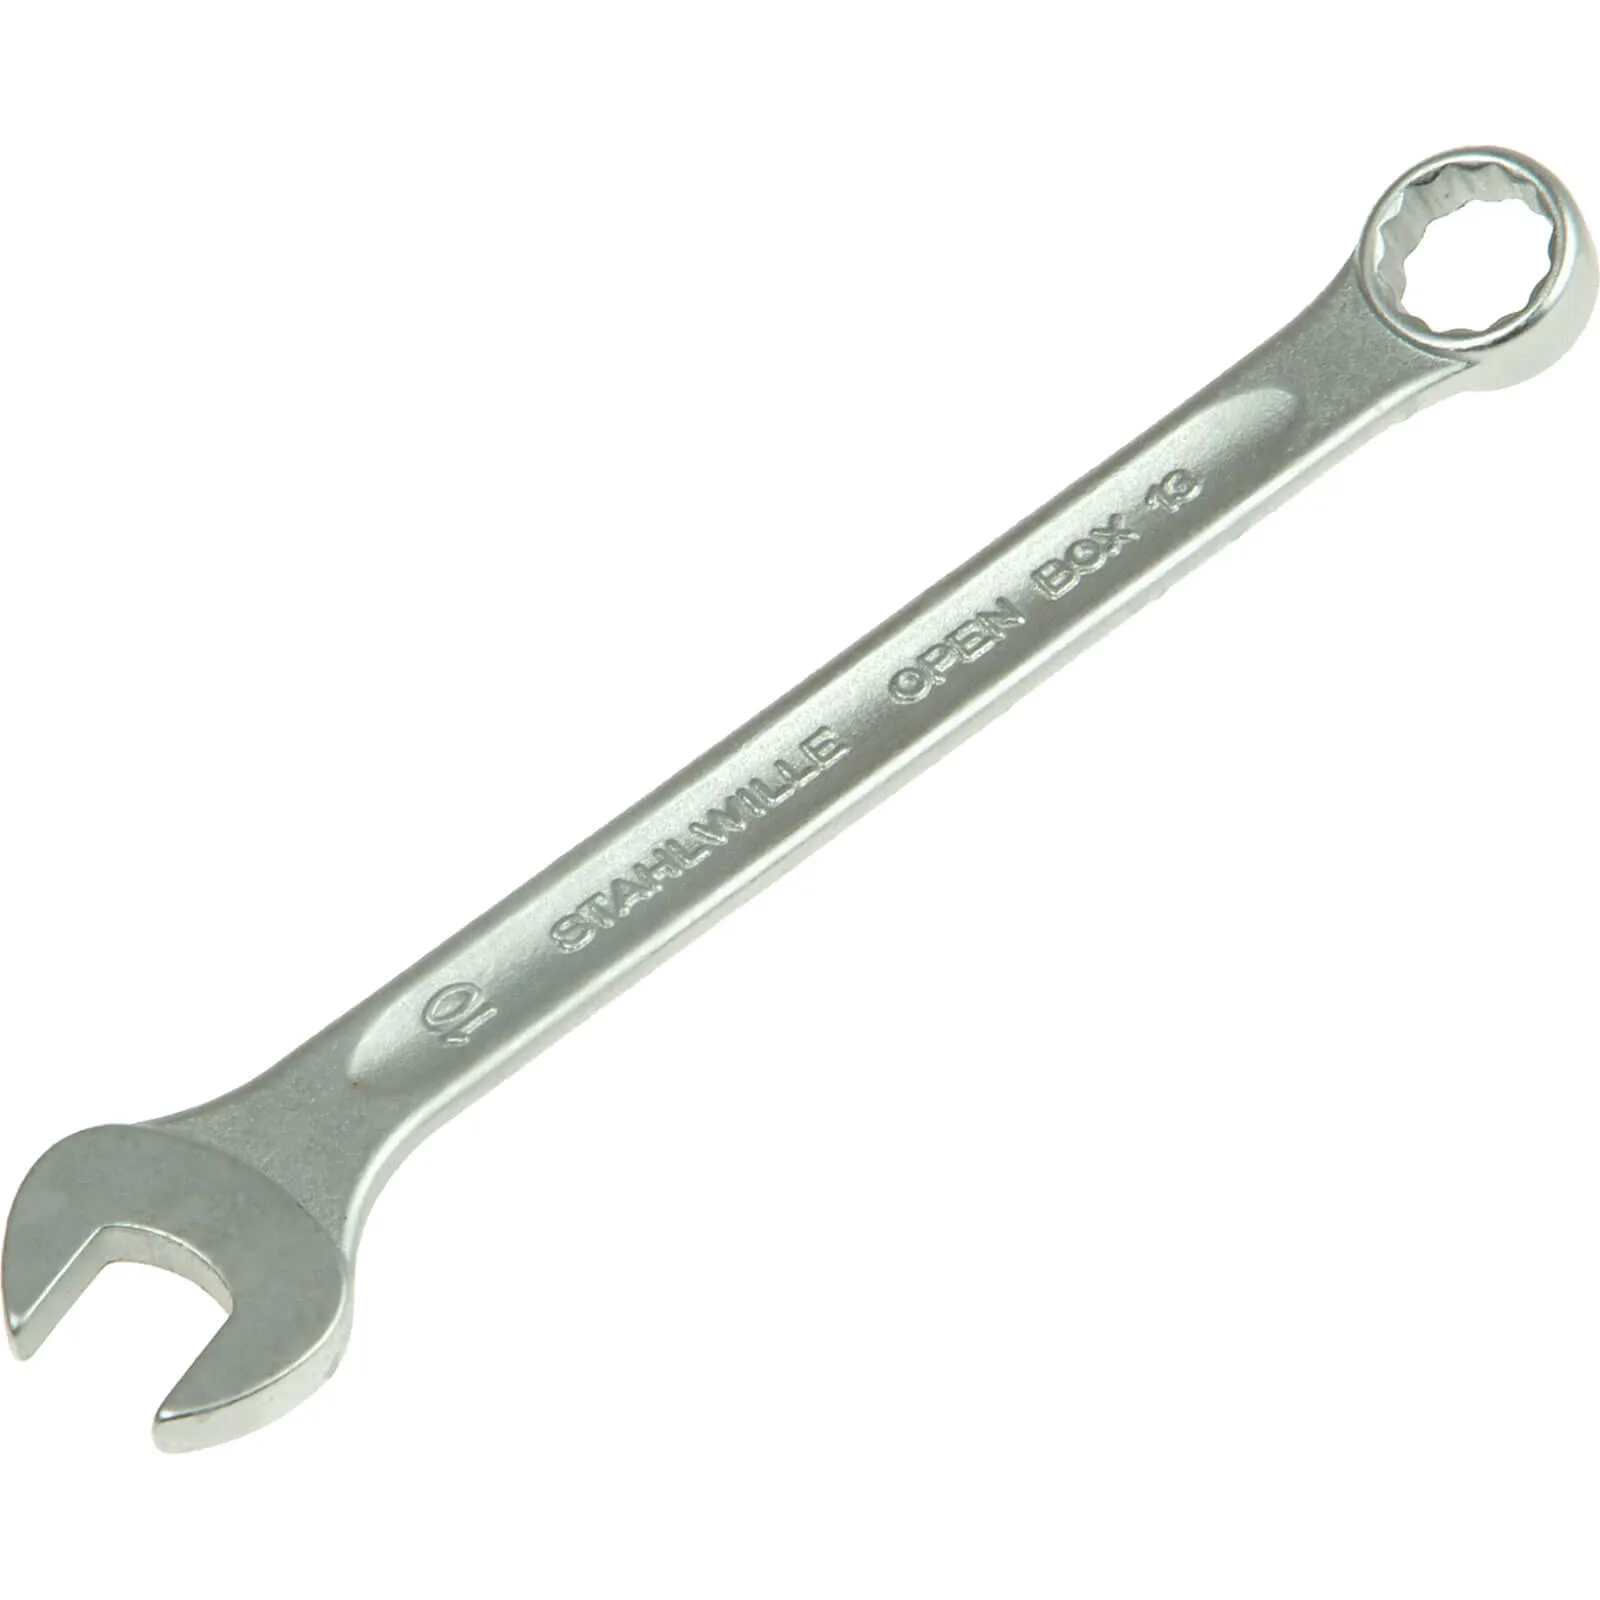 Stahlwille 13 Series Combination Spanner Metric - 10mm